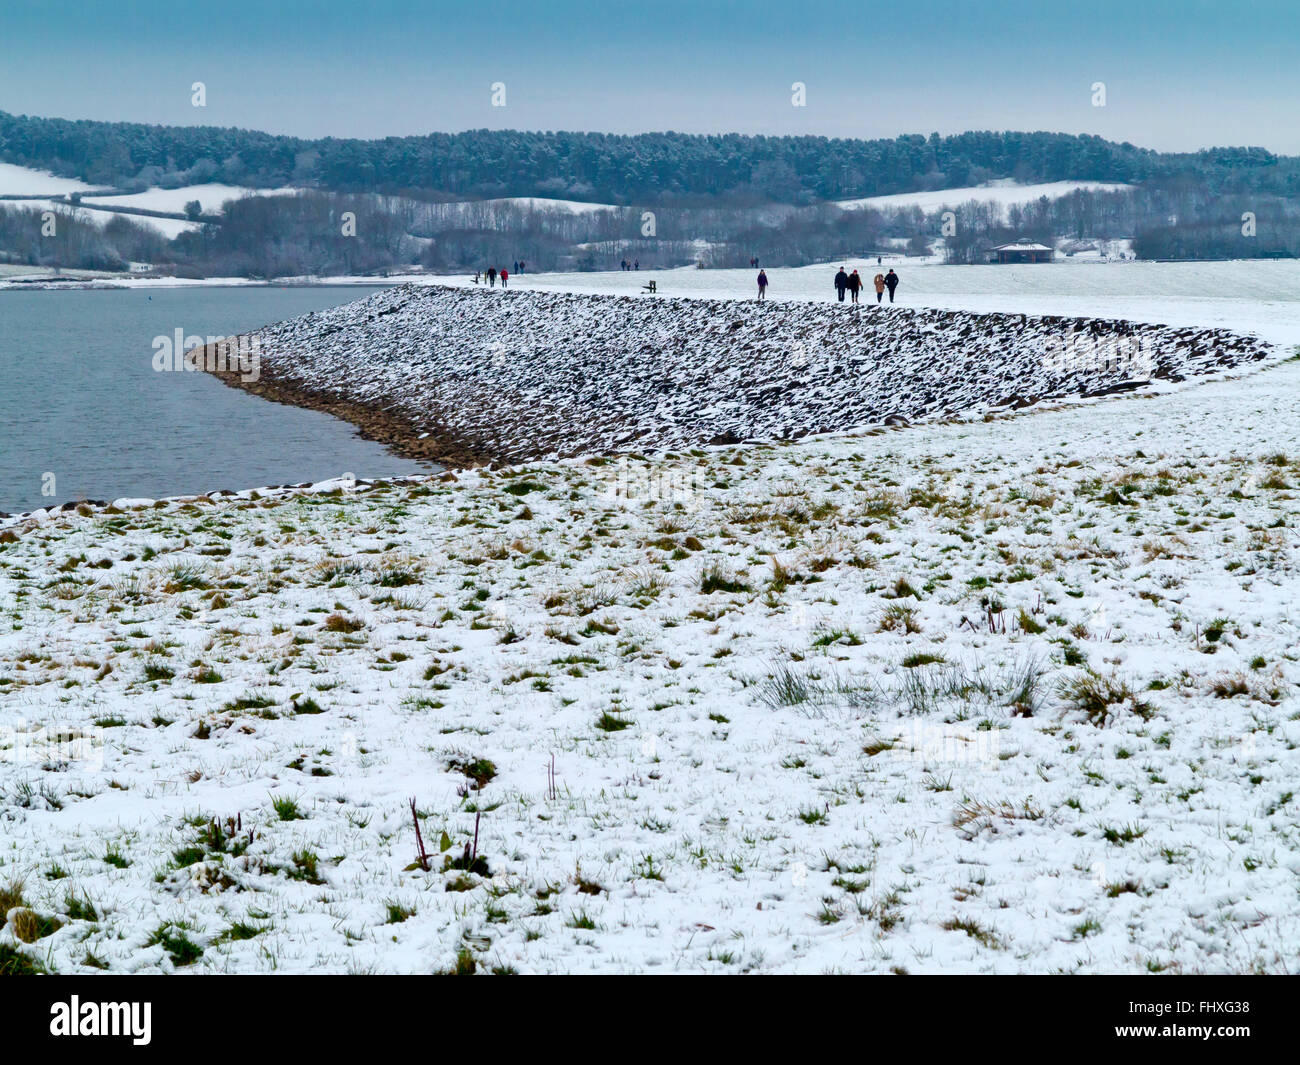 Winter scene at Carsington Water a reservoir operated by Severn Trent Water near Matlock in Derbyshire Dales Peak District UK Stock Photo